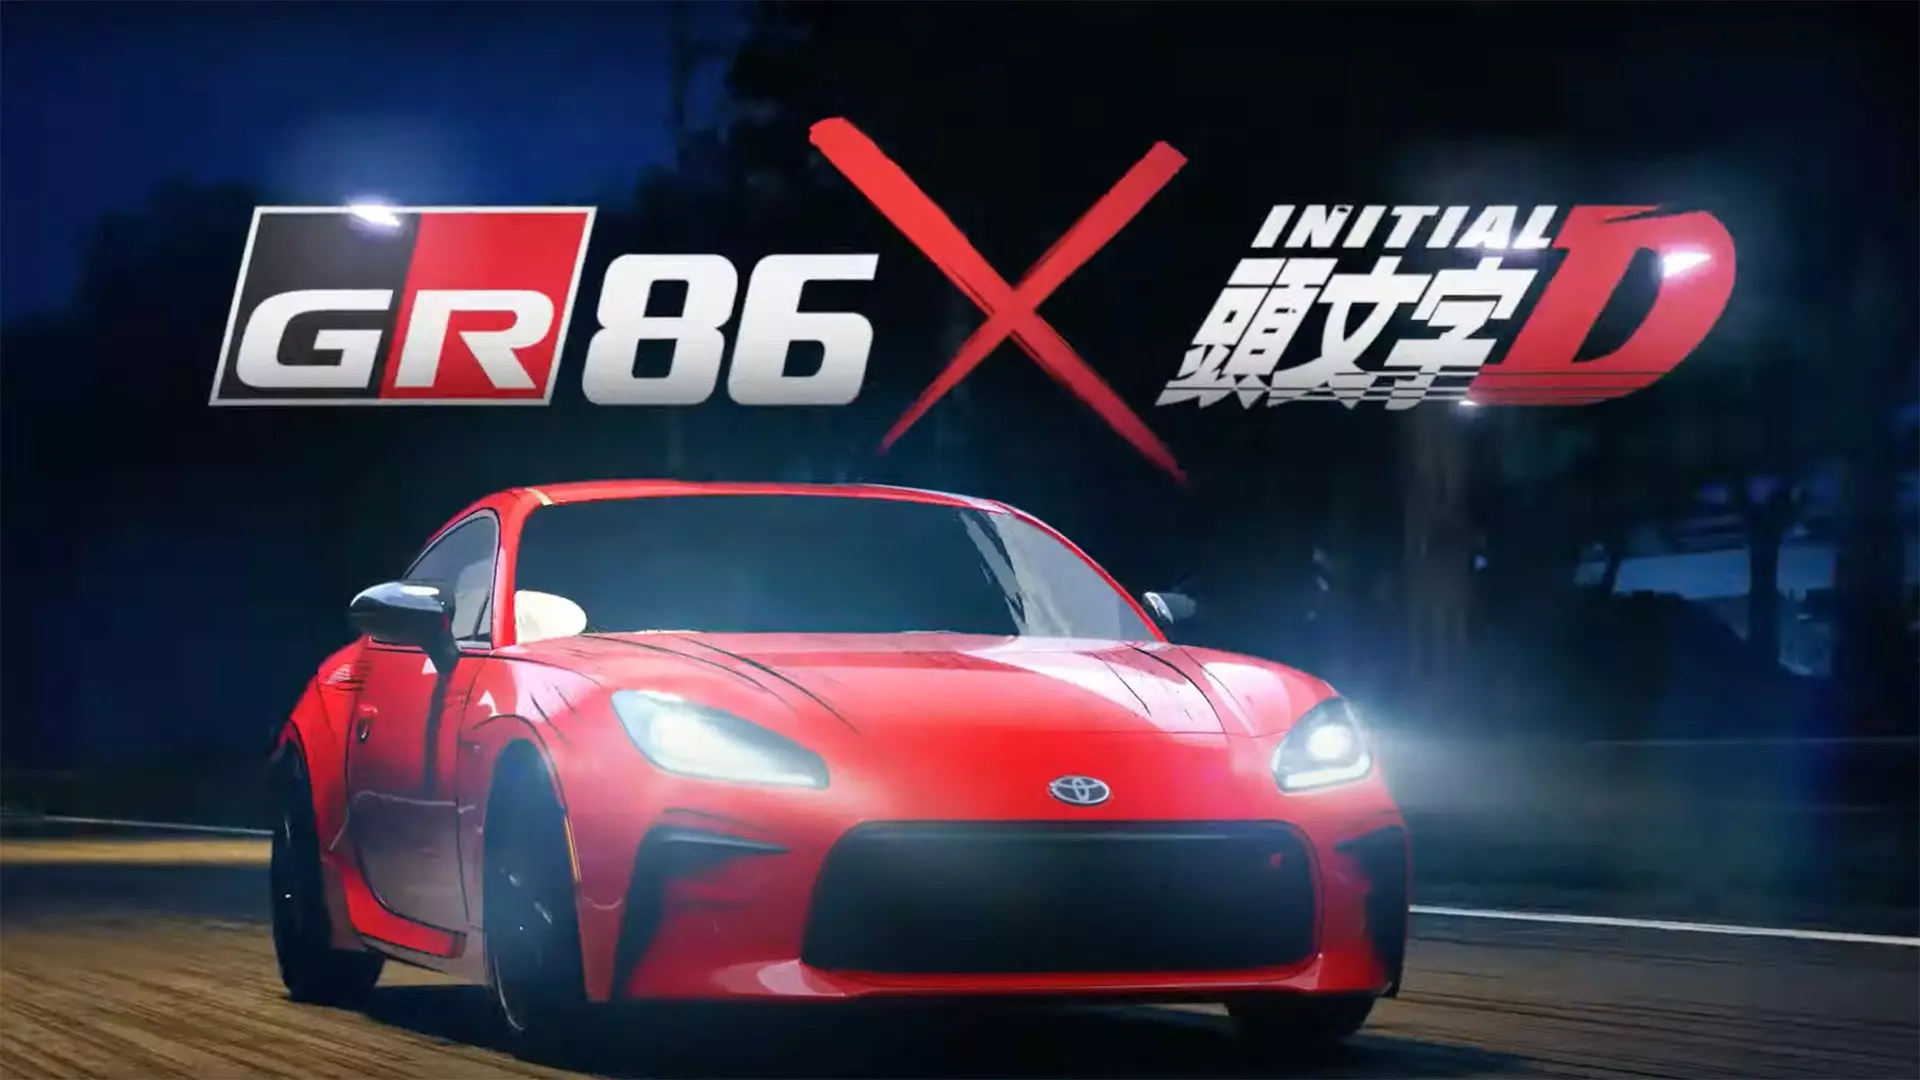 Toyota Got the Initial D Creator To Illustrate a GR86 Commercial, and It’s Legit